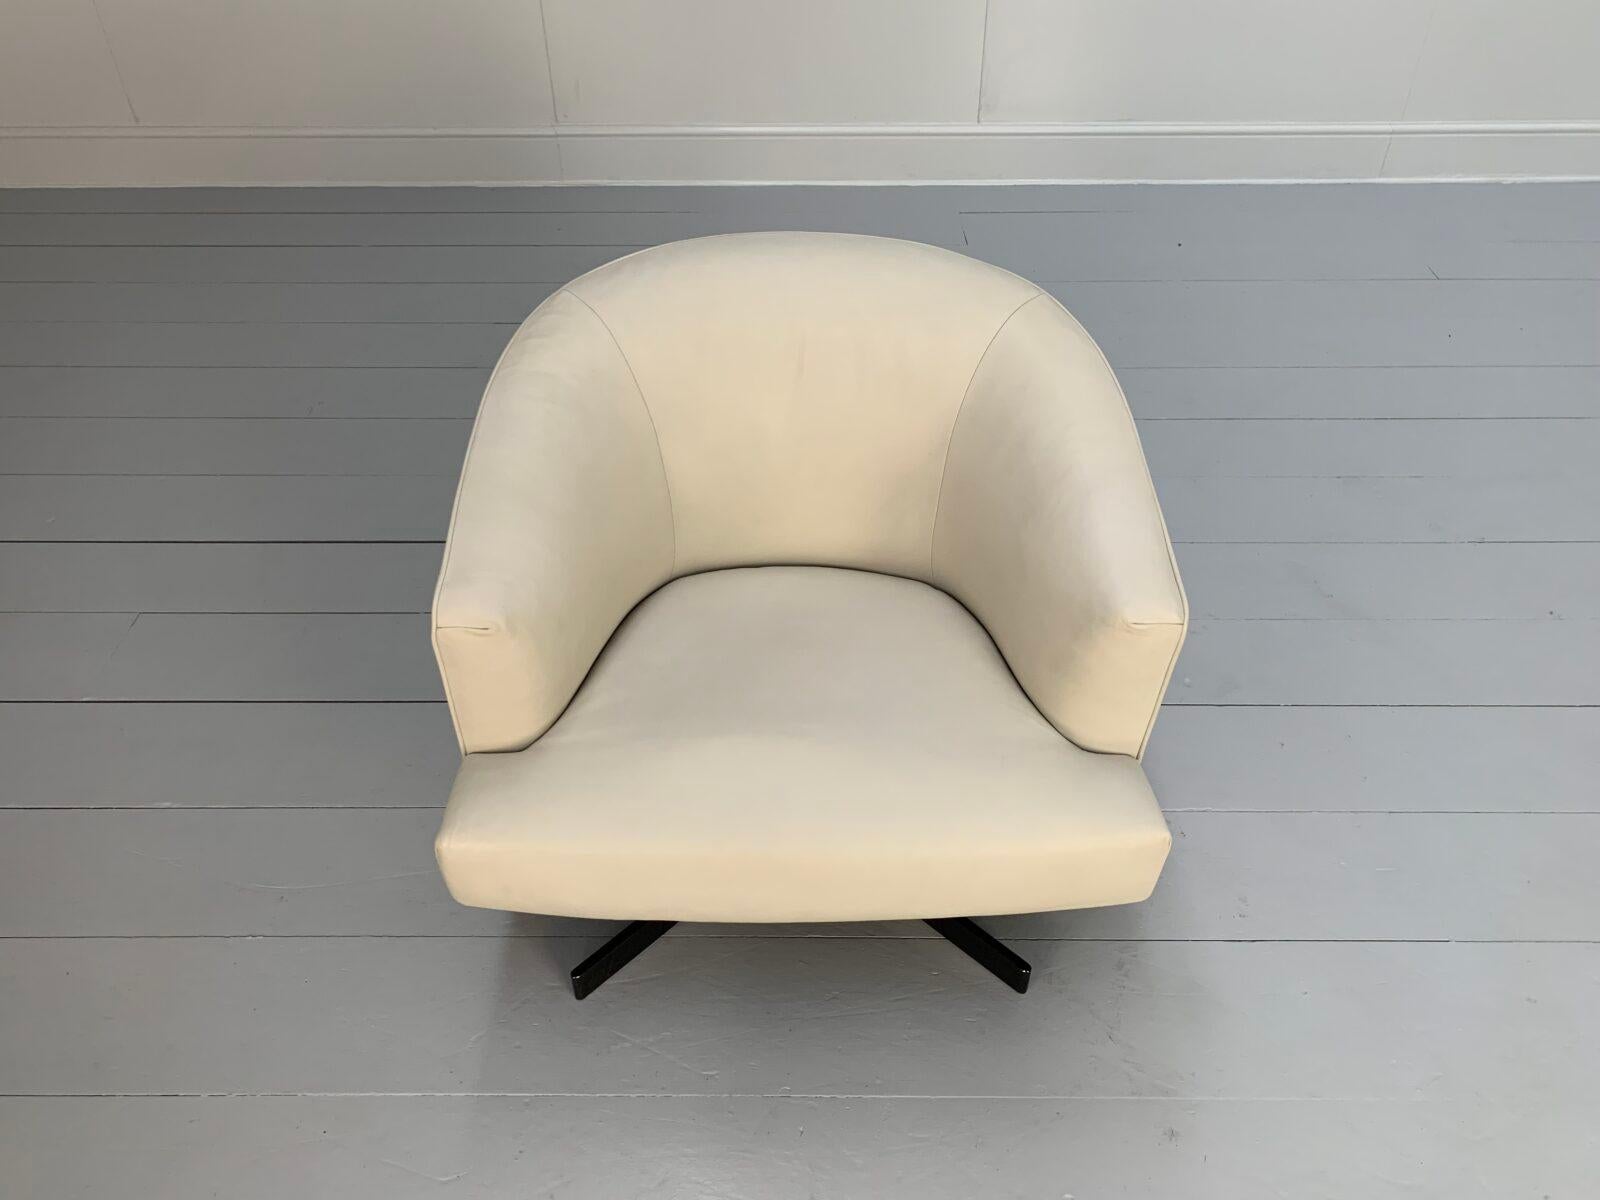 Contemporary Minotti “Martin” Armchair – In Ivory “Pelle” Leather For Sale